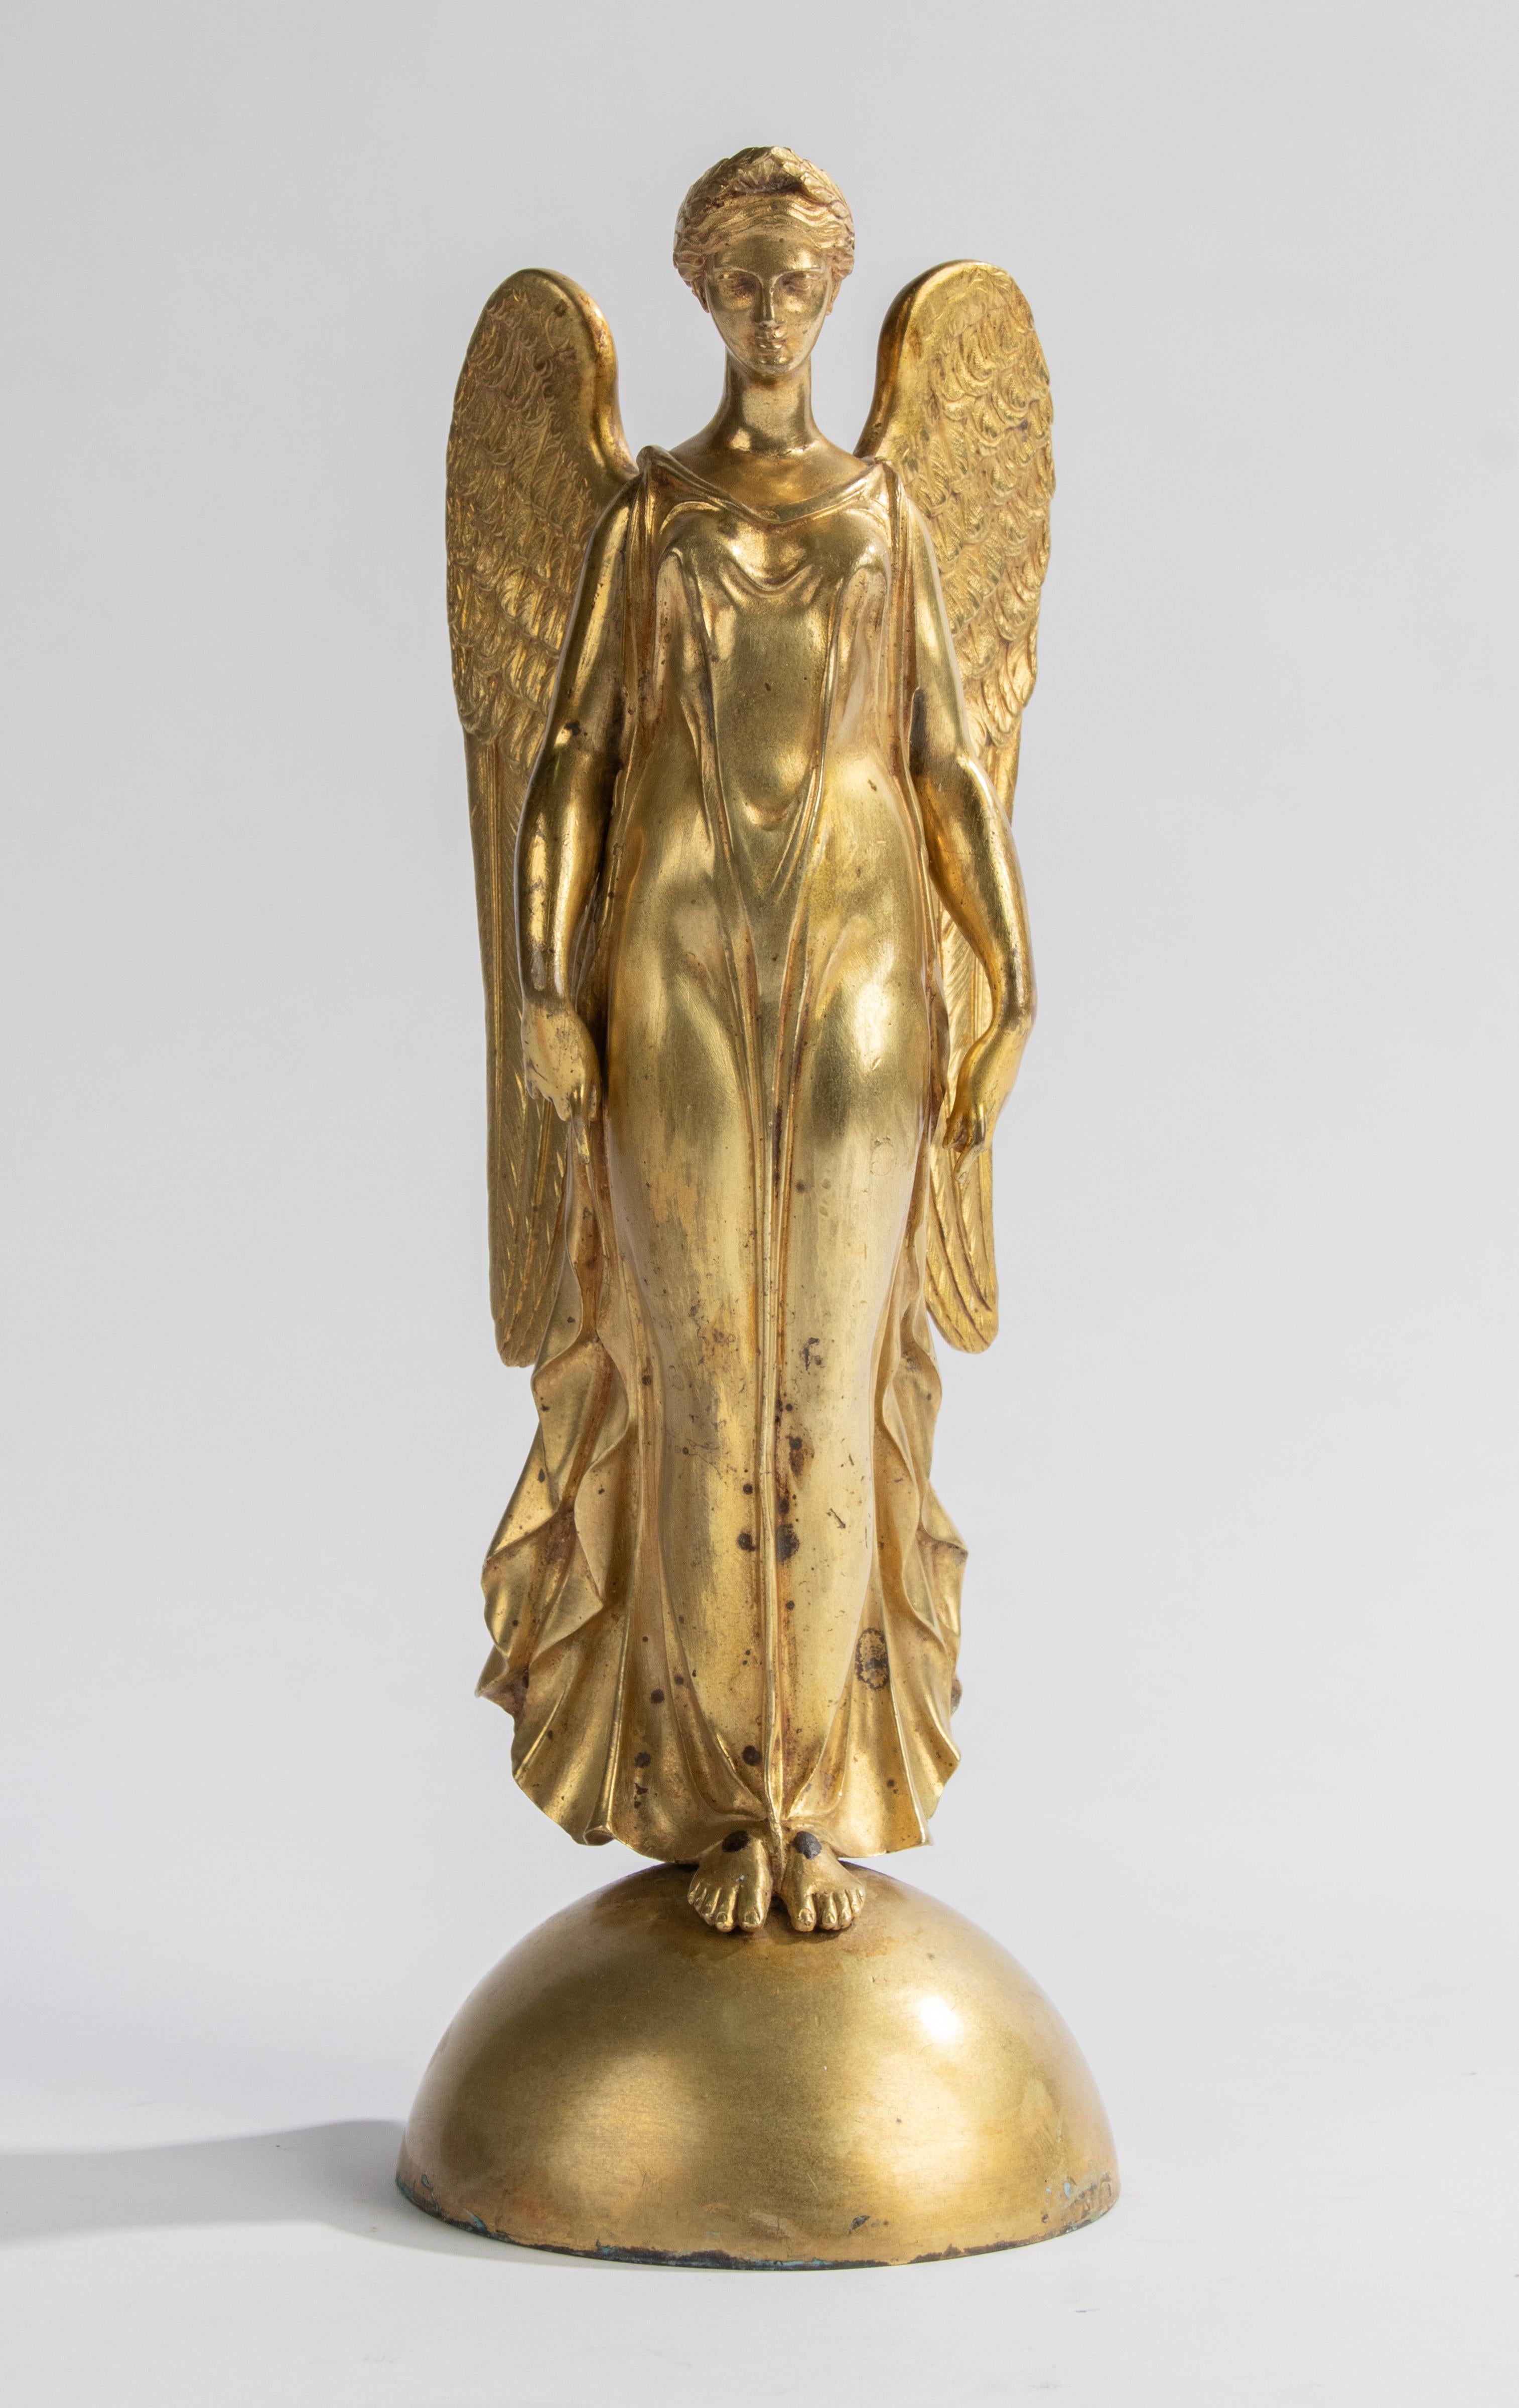 A graceful sculpture of a winged angel. The sculpture is made of casted bronze with an ormolu gilt patina. On a hemisphere, the inside of the sphere is filled with plaster, for a stable position. Made in France, 1870-1880
Dimensions: 29(h) x 9 x 8